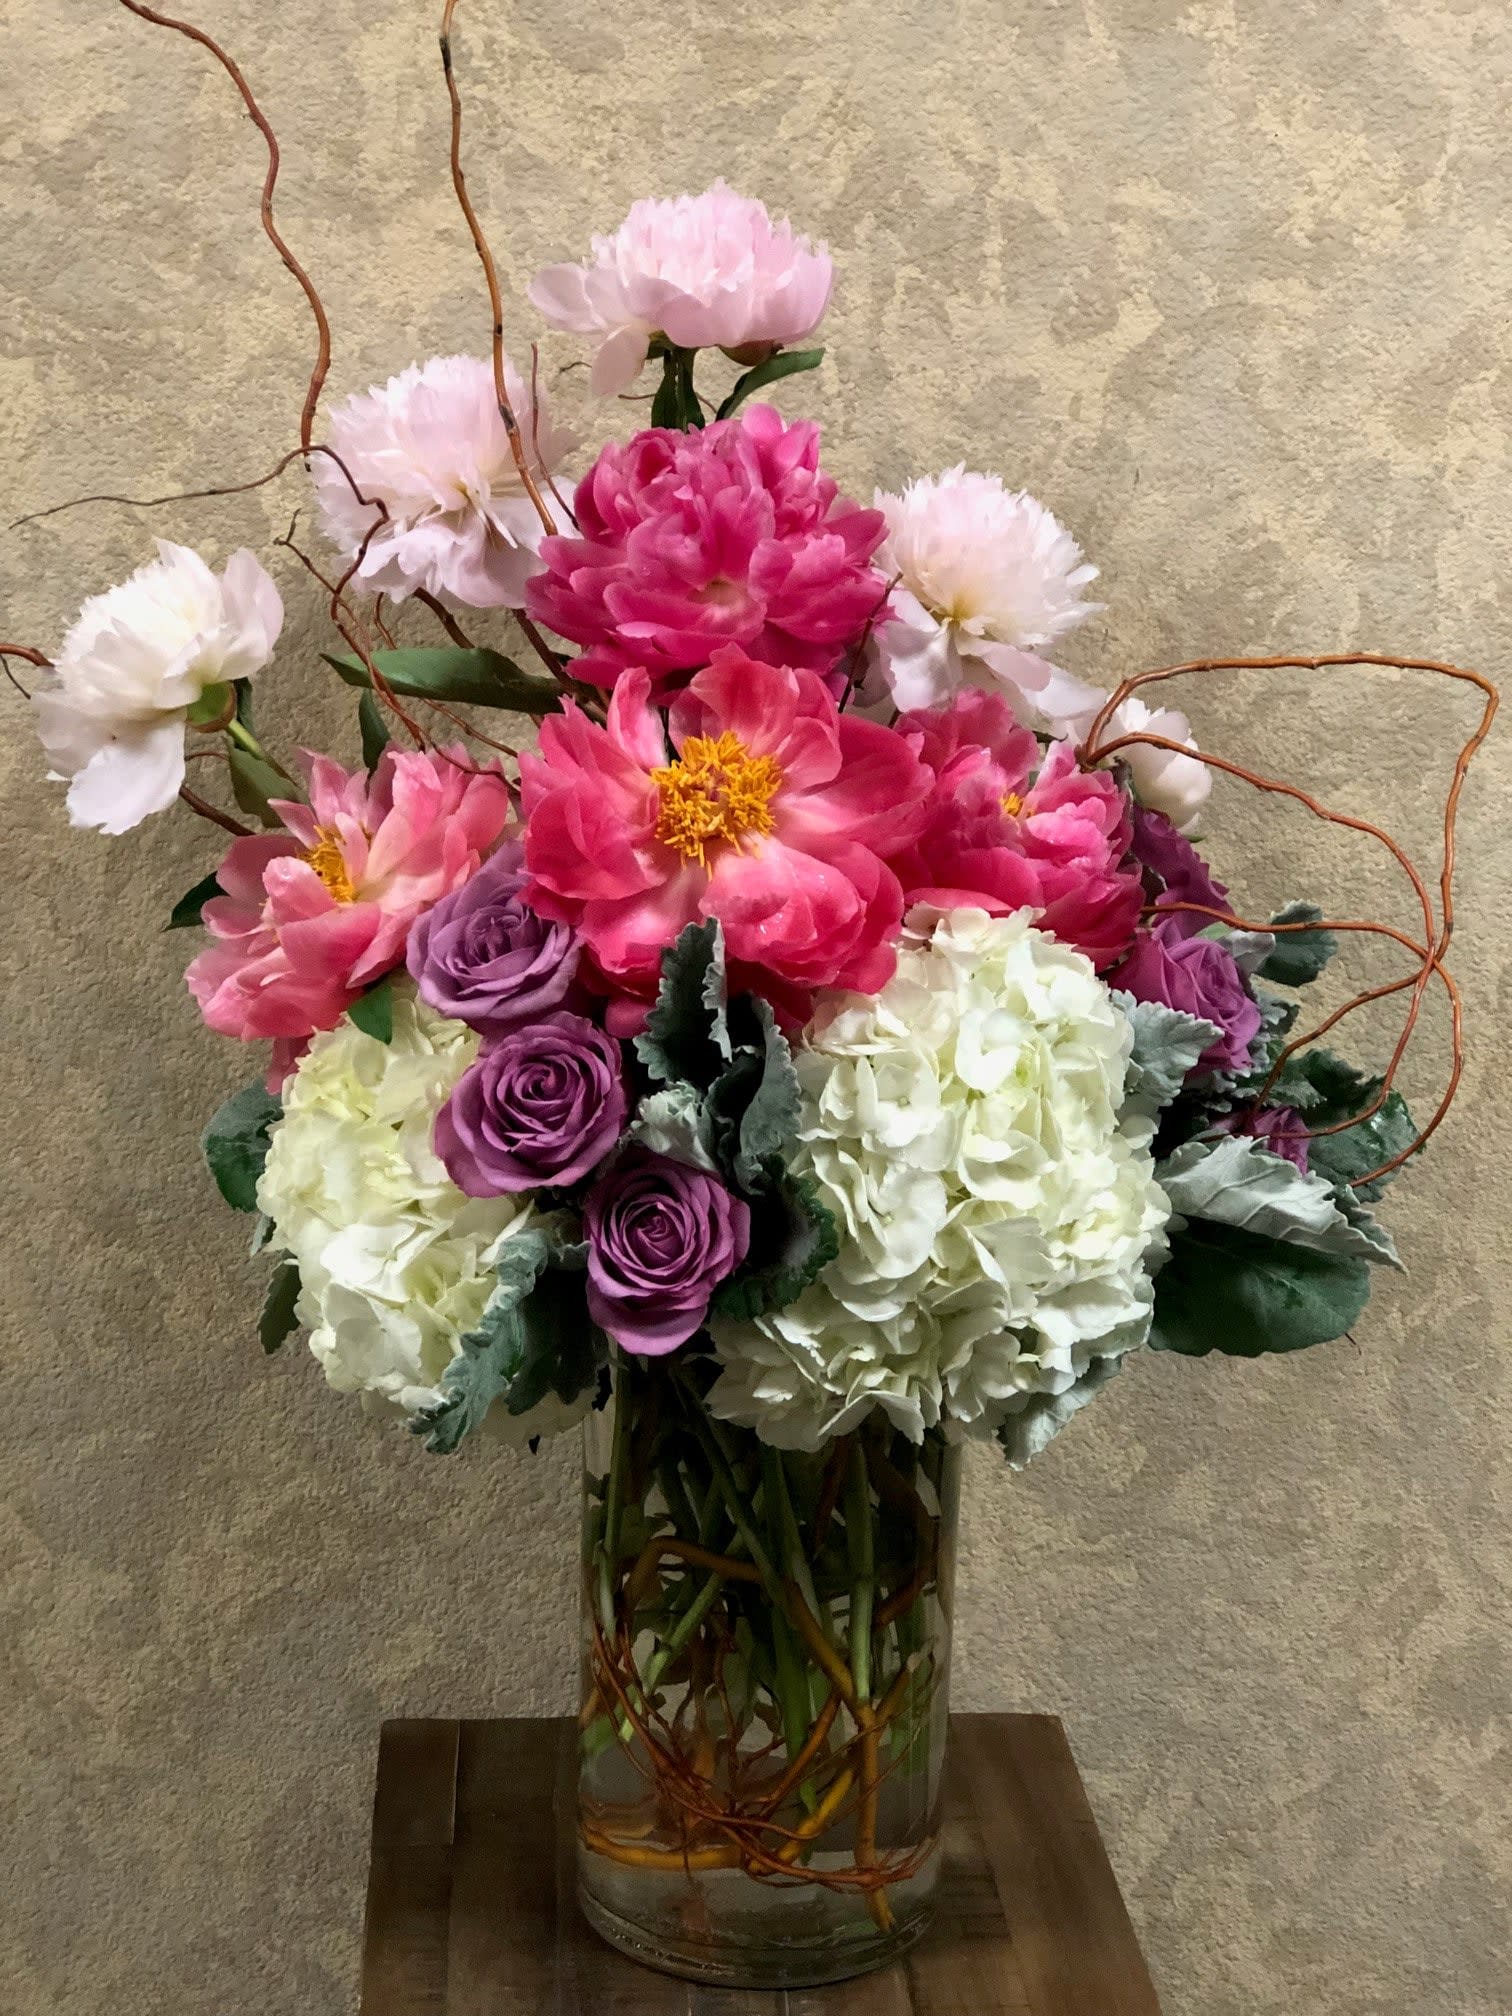 Holland Peonies - Type of Flowers: Pink Peonies, Lavender Roses, White Hydrangeas, and Branches in a large vase. Availability: April, May, and June Substitute Available: Yes Design View: Symmetric Front Facing View Photo shown: Regular